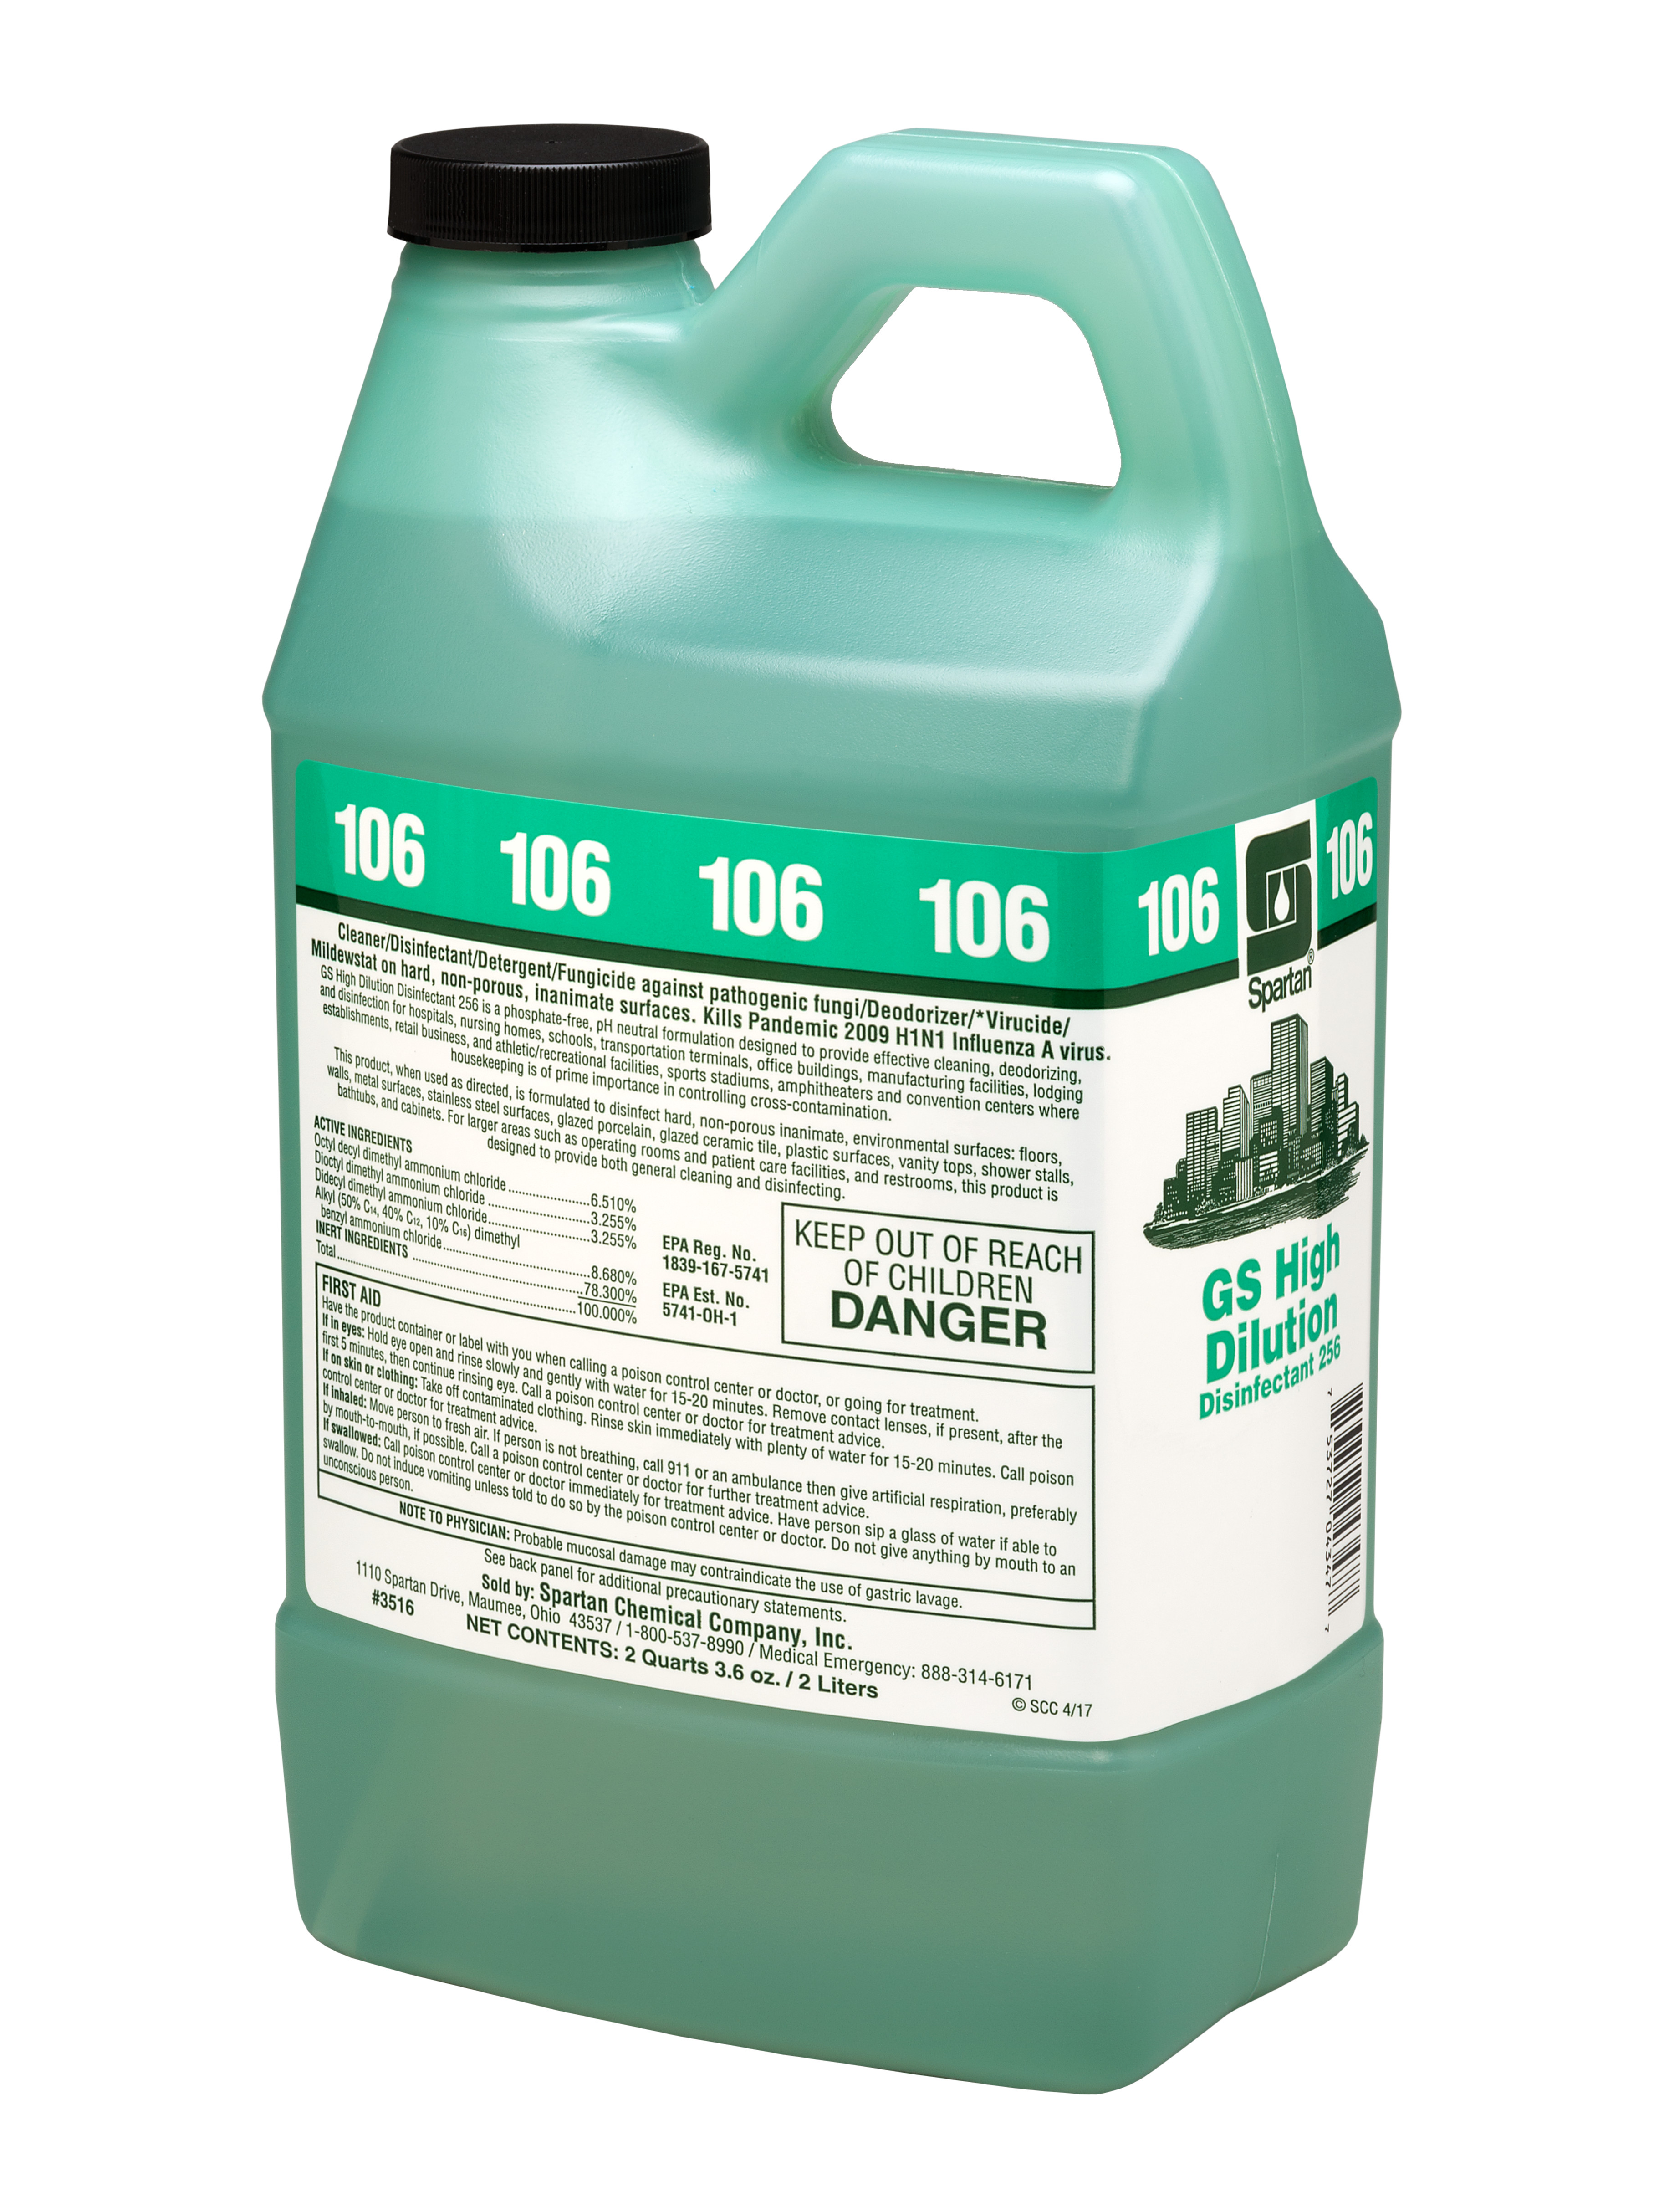 Spartan Chemical Company GS High Dilution Disinfectant 256 106, 2 LITER 4/CS